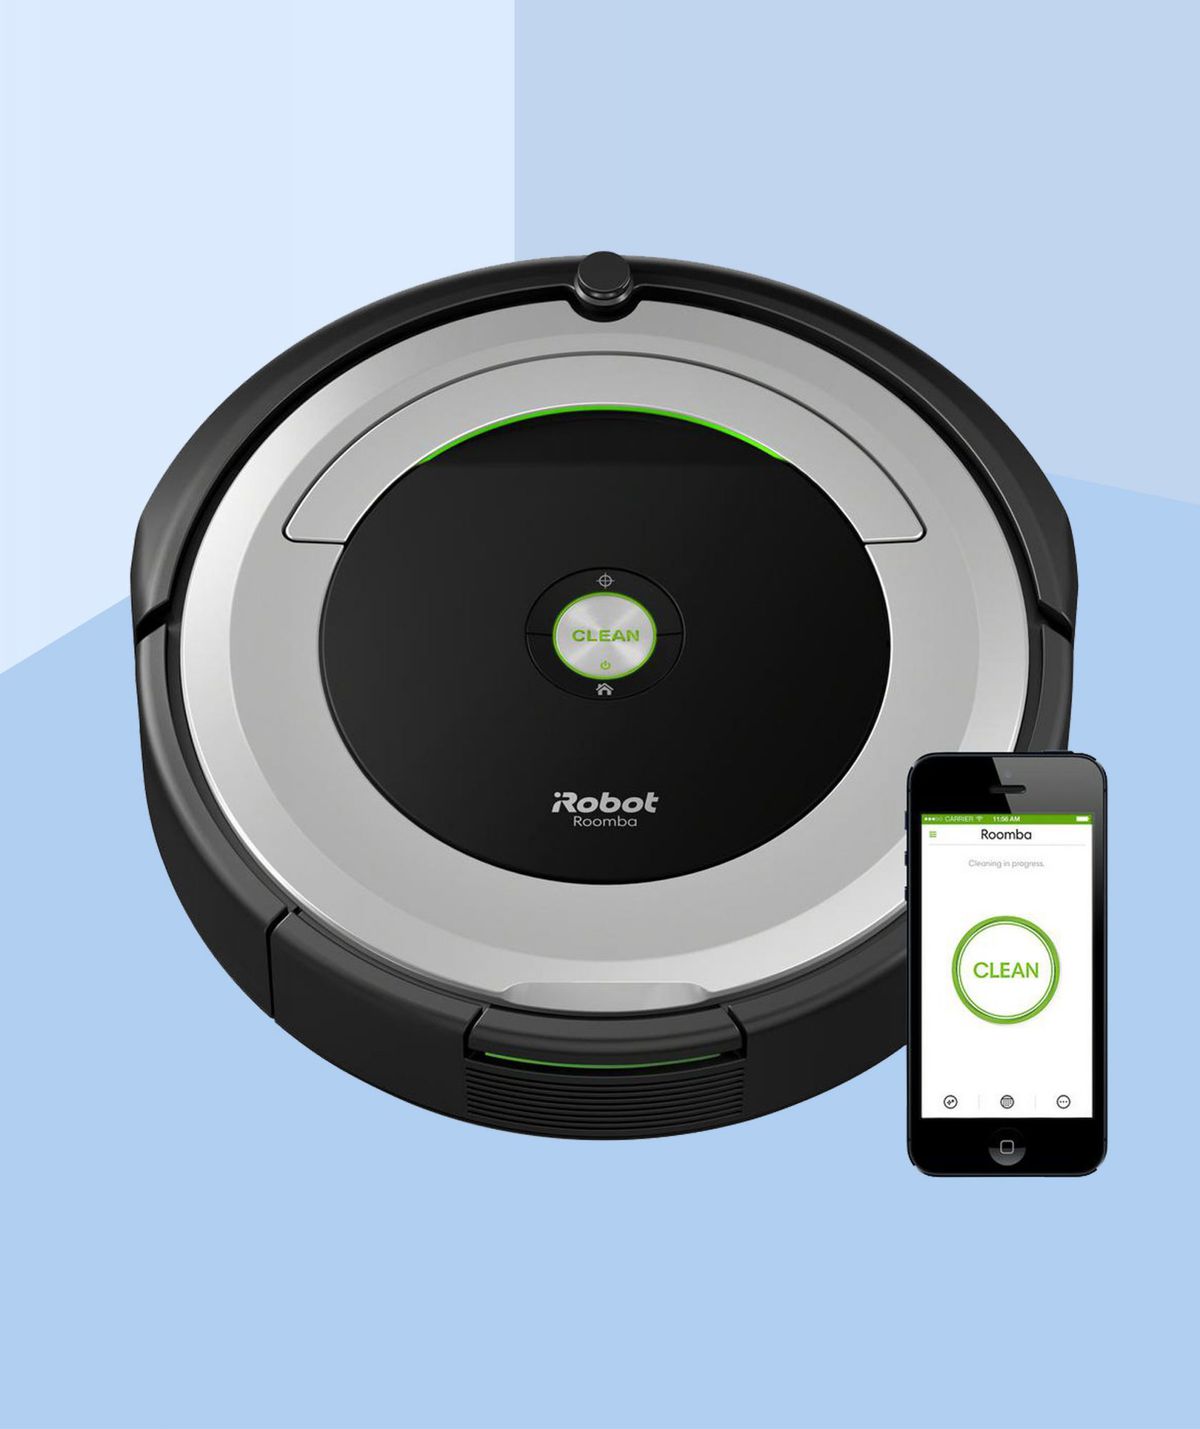 Amazon’s Most Popular Roomba Robot Vacuums Are Already on Sale Weeks Ahead of Prime Day